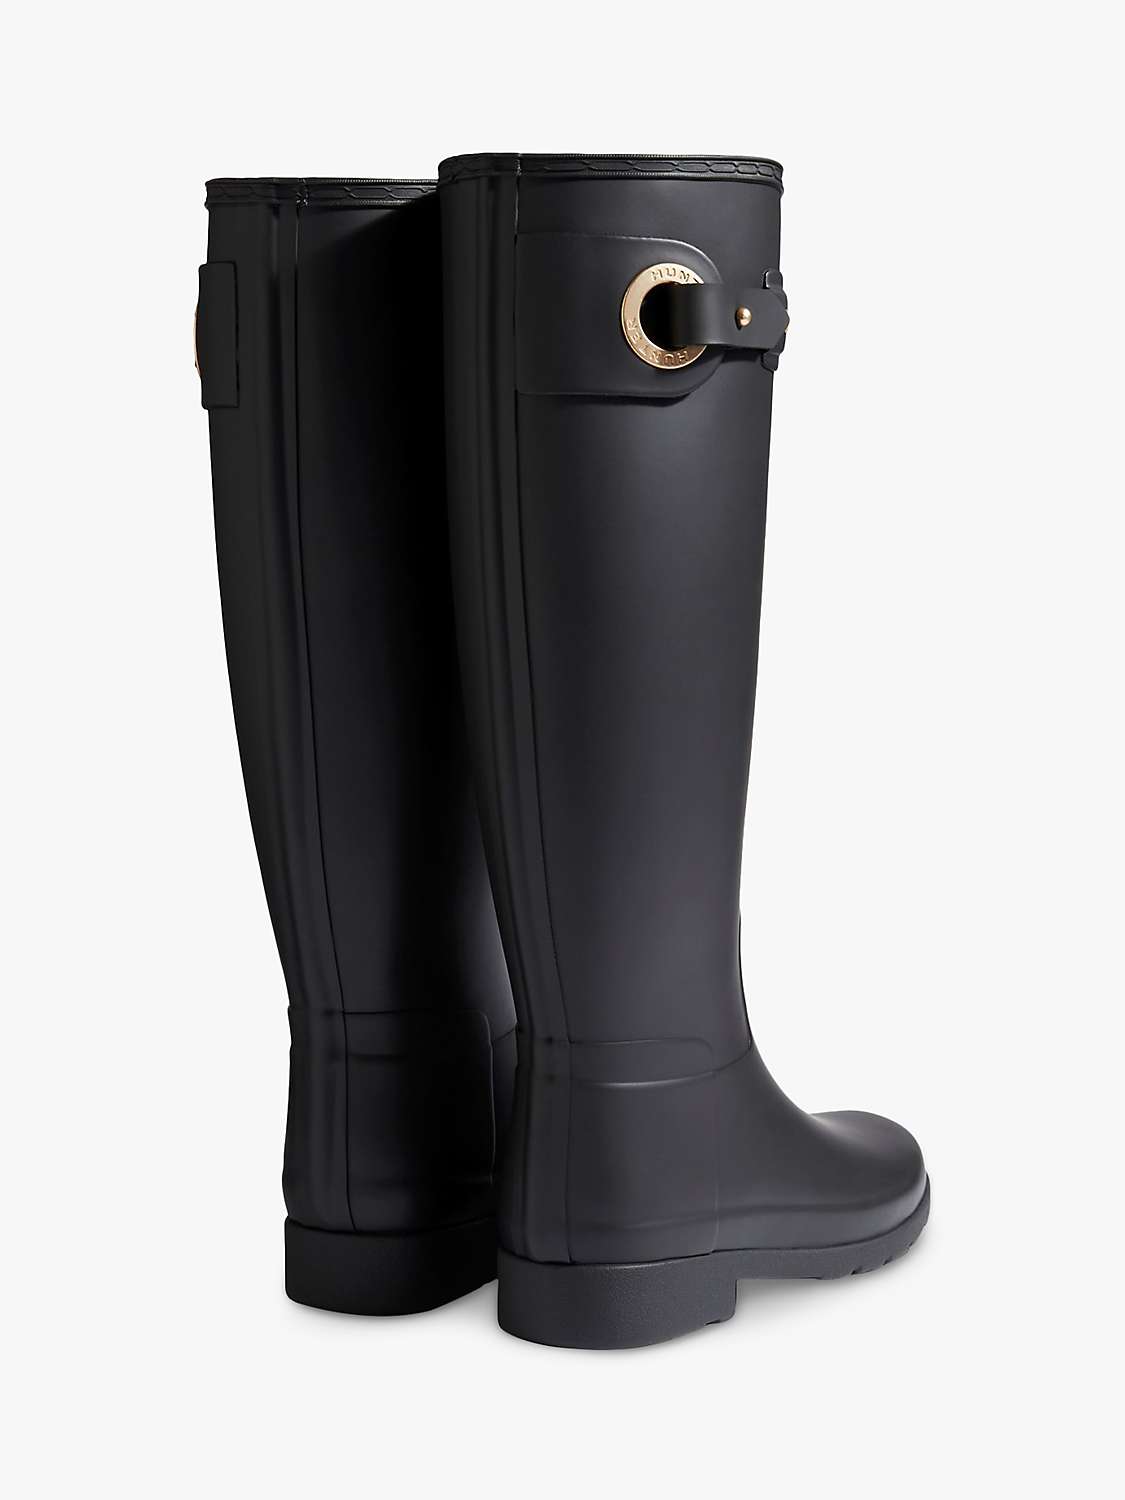 Buy Hunter Refined Tall Buckle Wellington Boots, Black Online at johnlewis.com